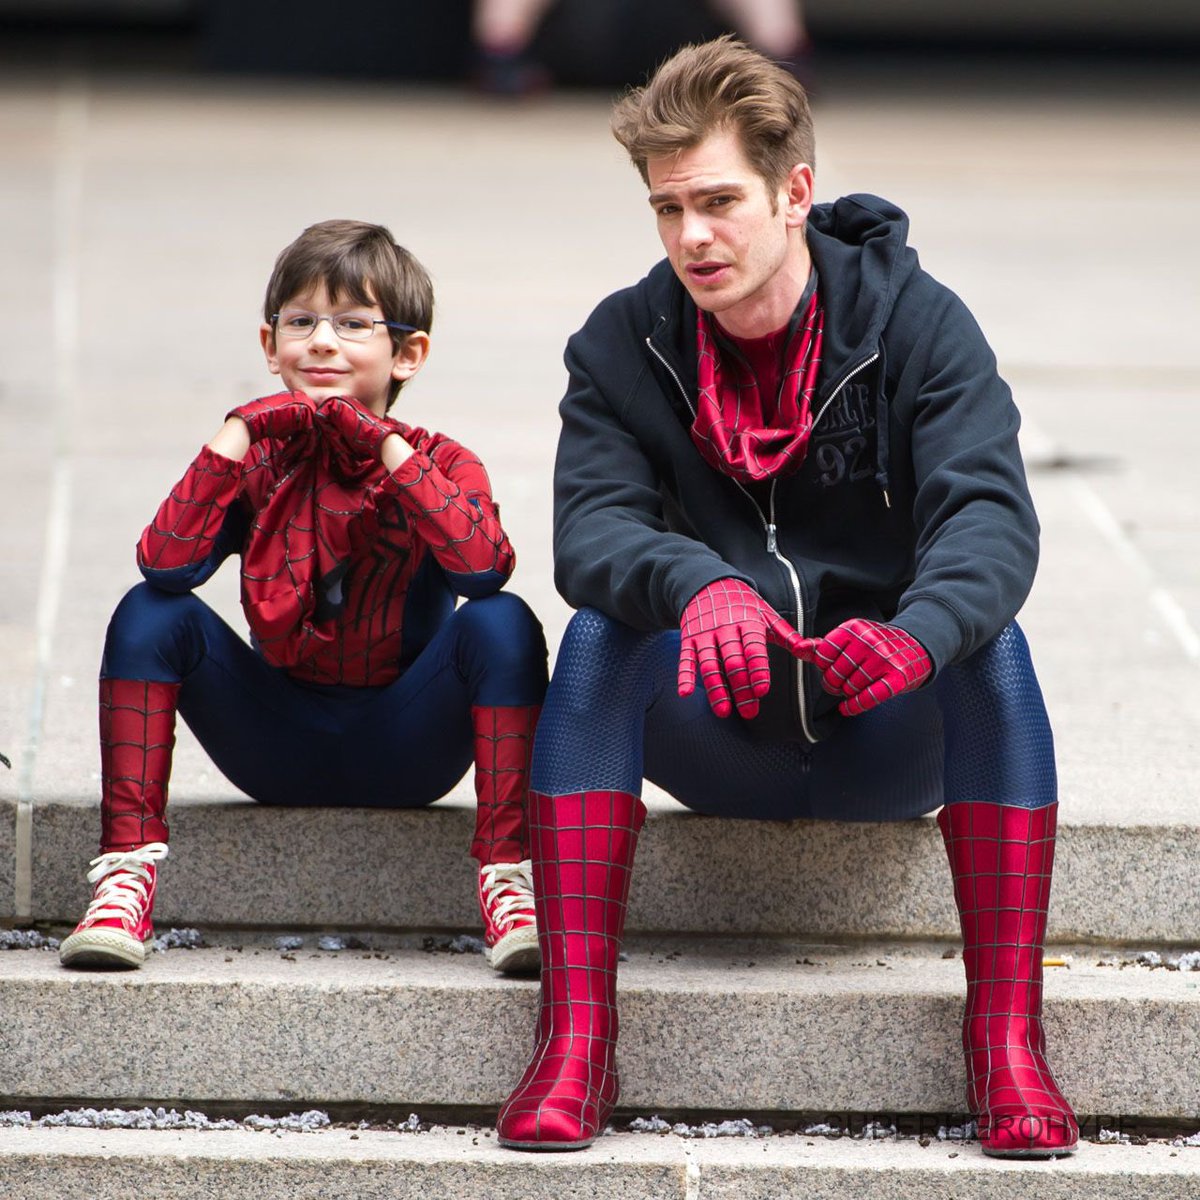 RT @Earth120703: Jorge Vega and Andrew Garfield behind the scenes of The Amazing Spider-Man 2 https://t.co/q7lQyYjE3c